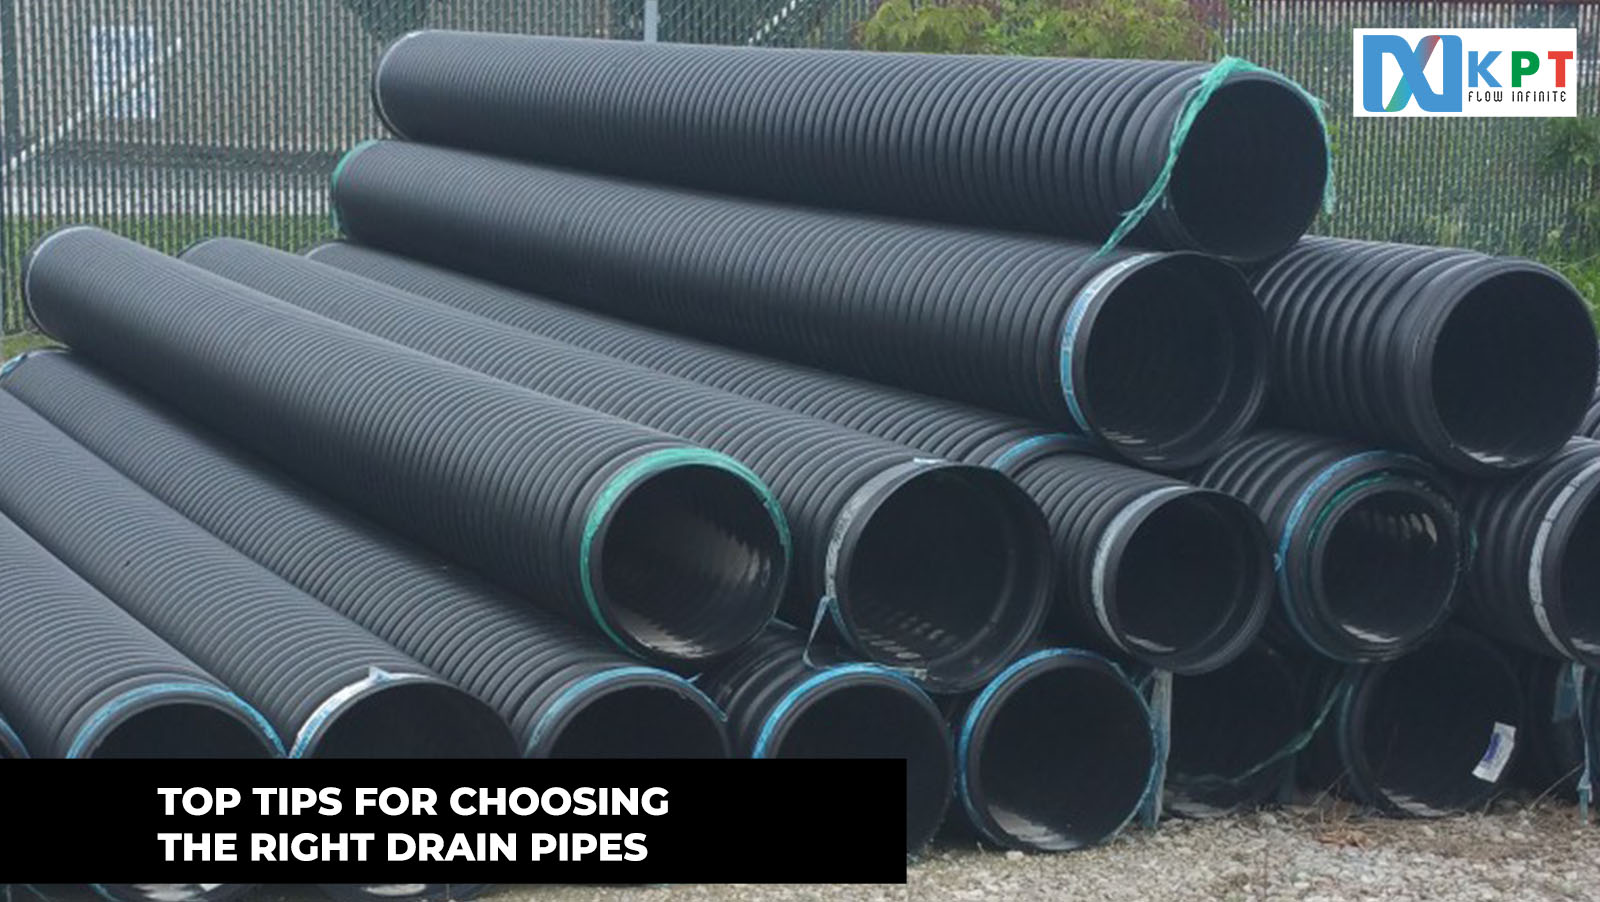 Top Tips for Choosing the rights drain pipes